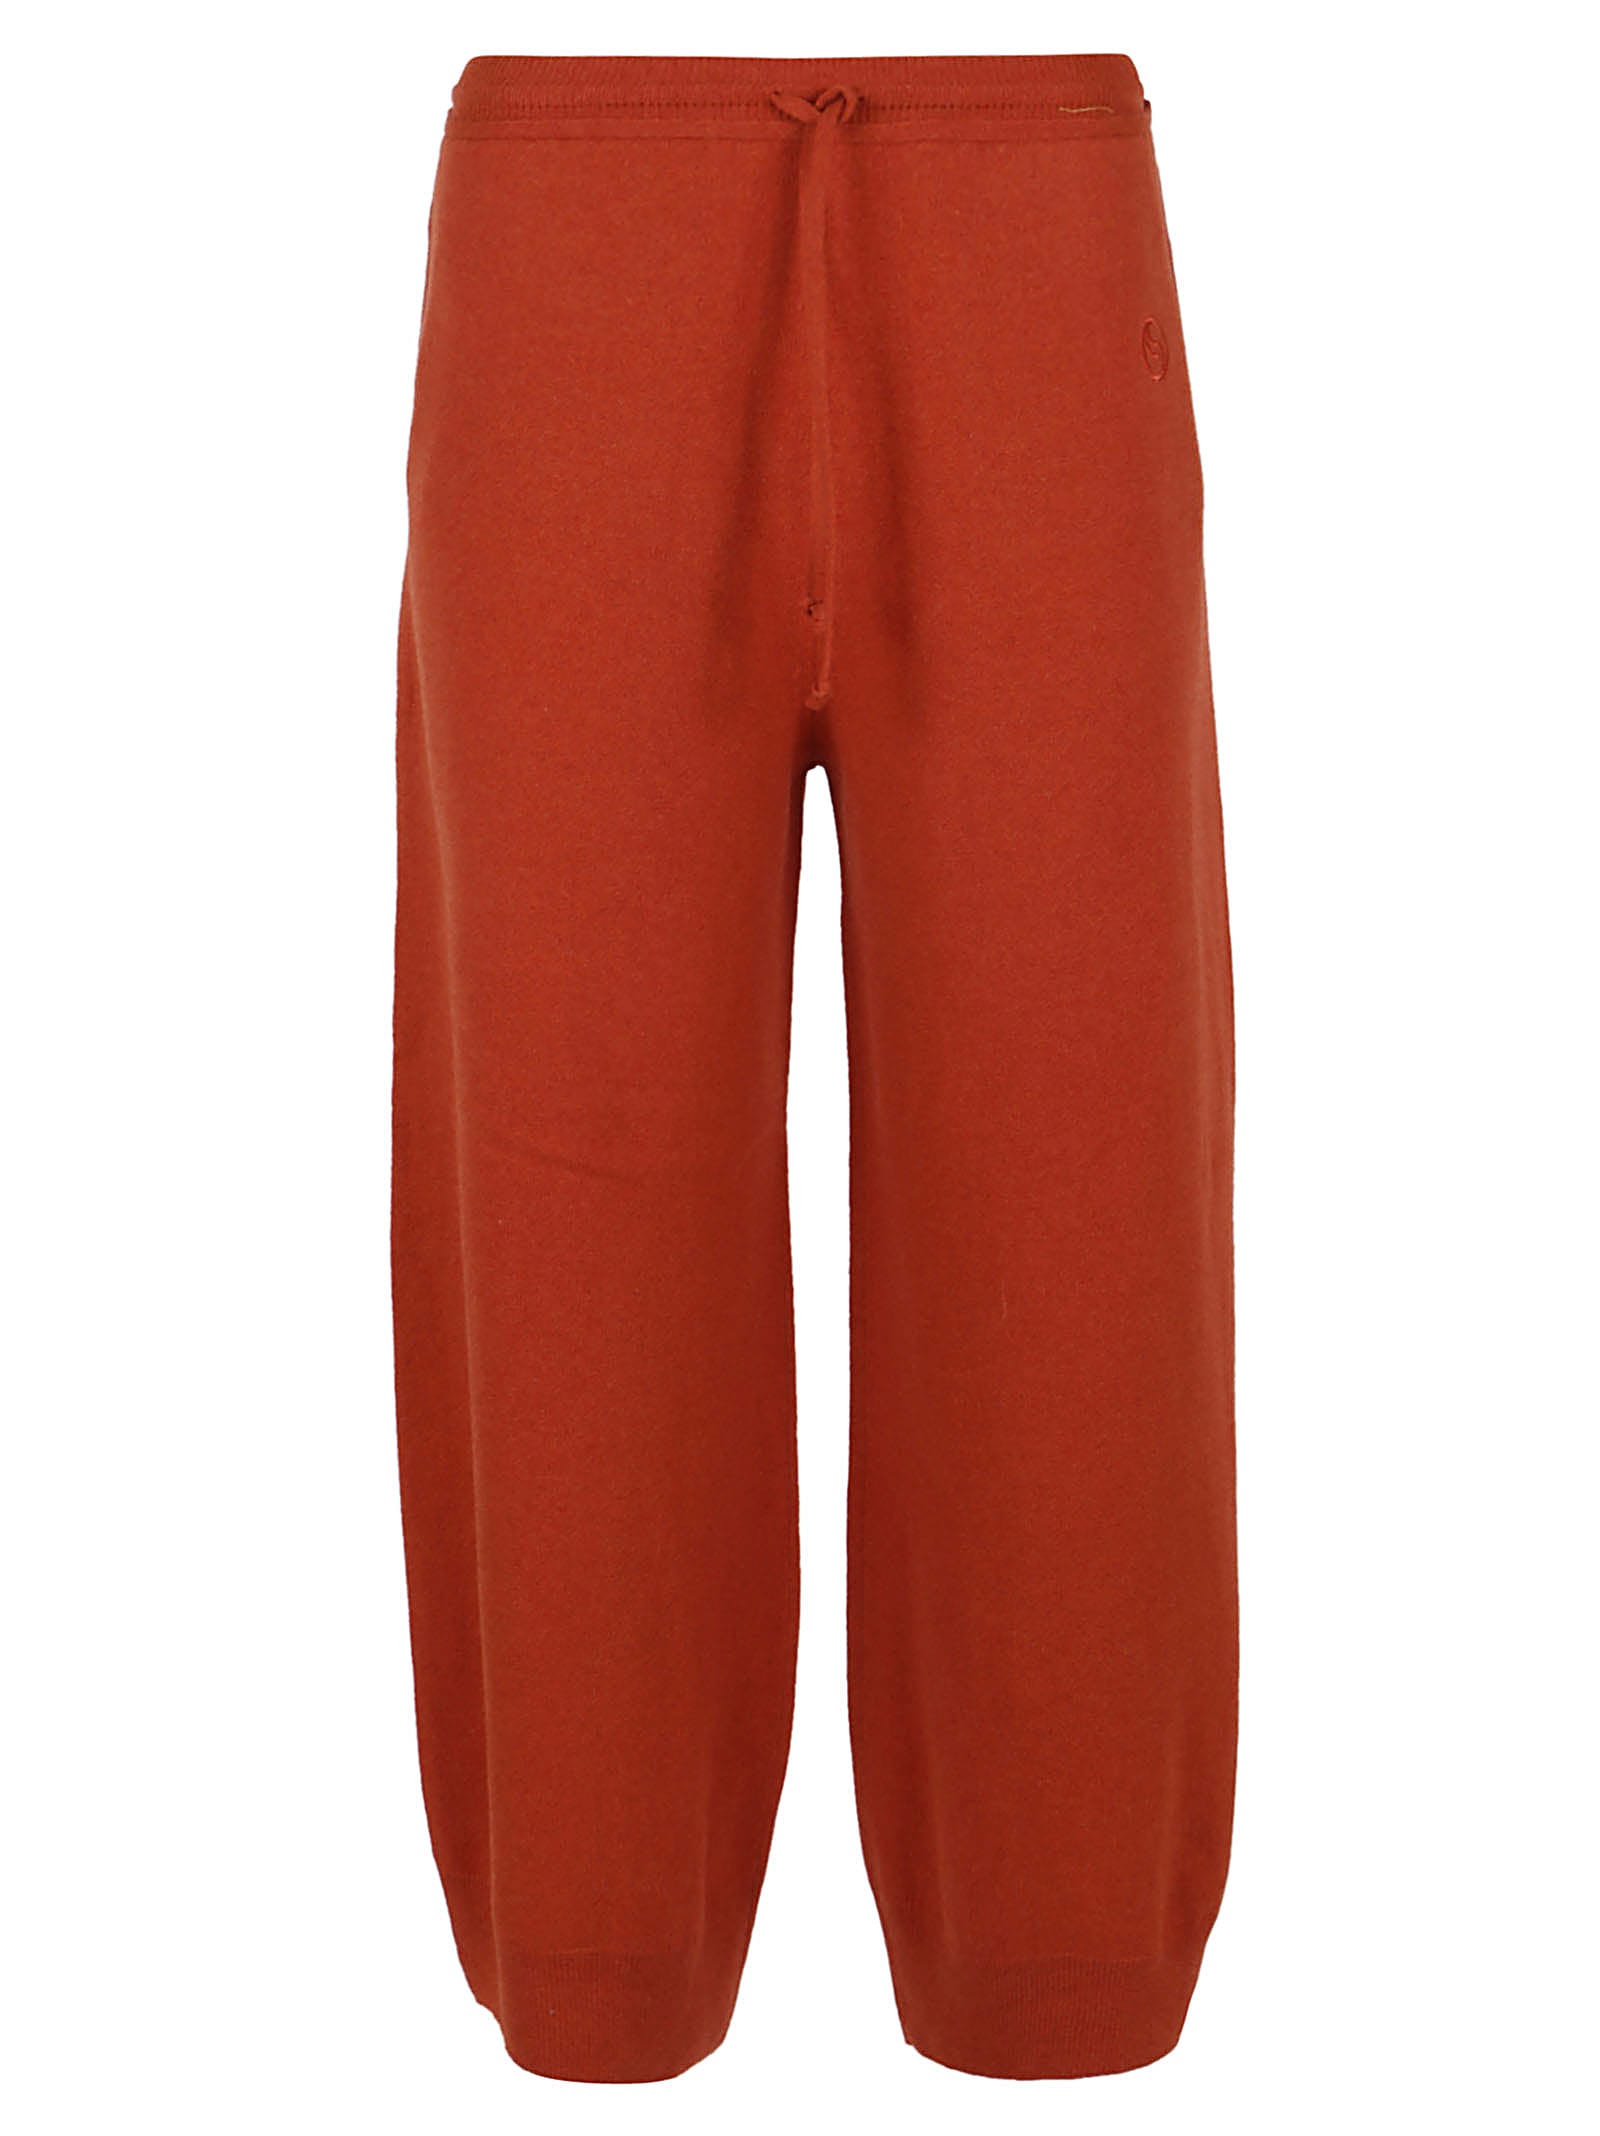 Stella McCartney Relaxed Cashmere Wardrobe Trousers Knit